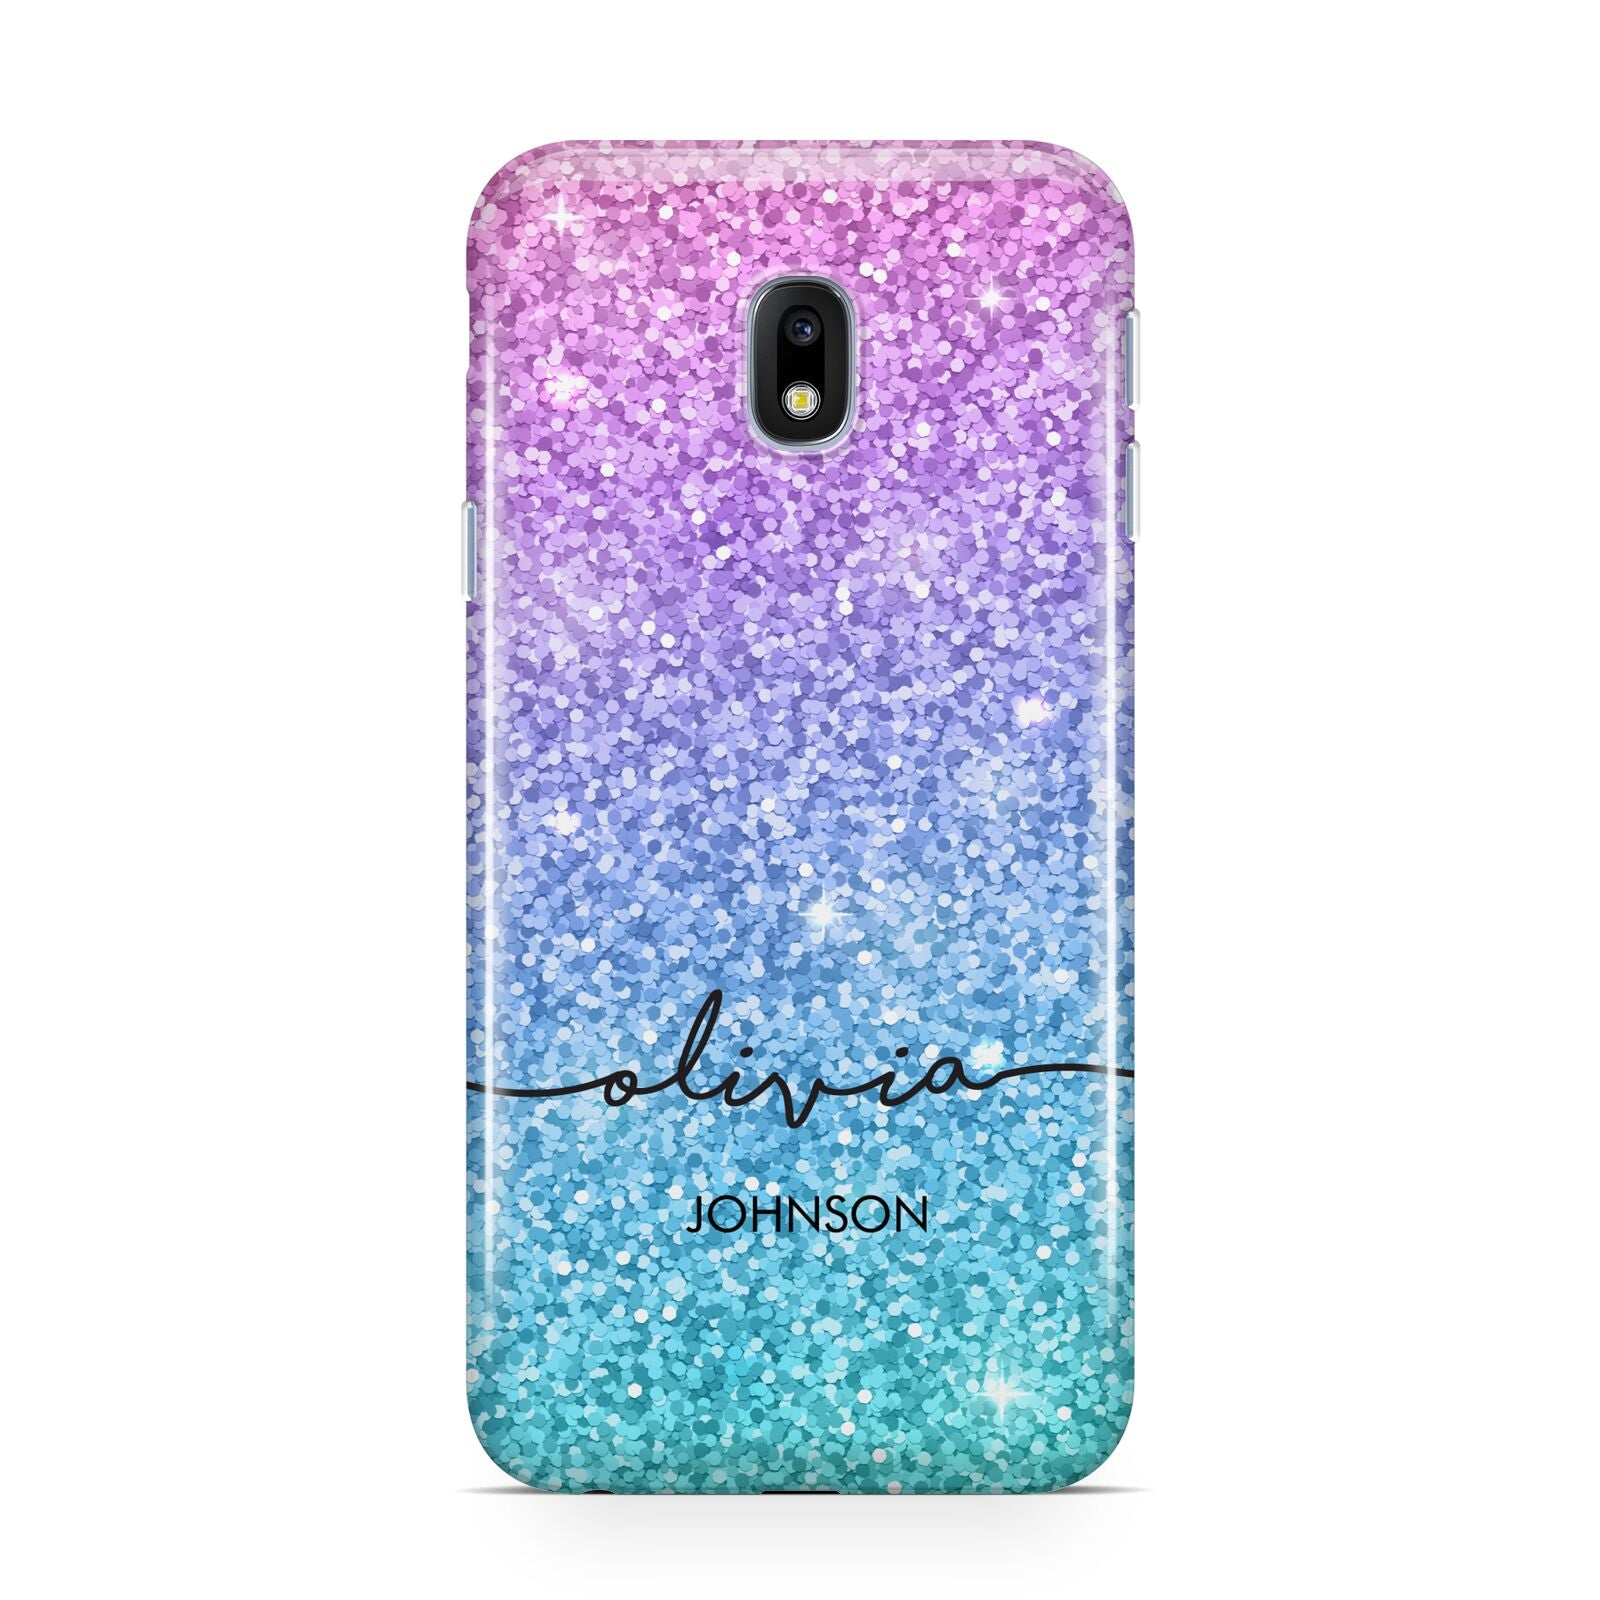 Personalised Ombre Glitter with Names Samsung Galaxy J3 2017 Case